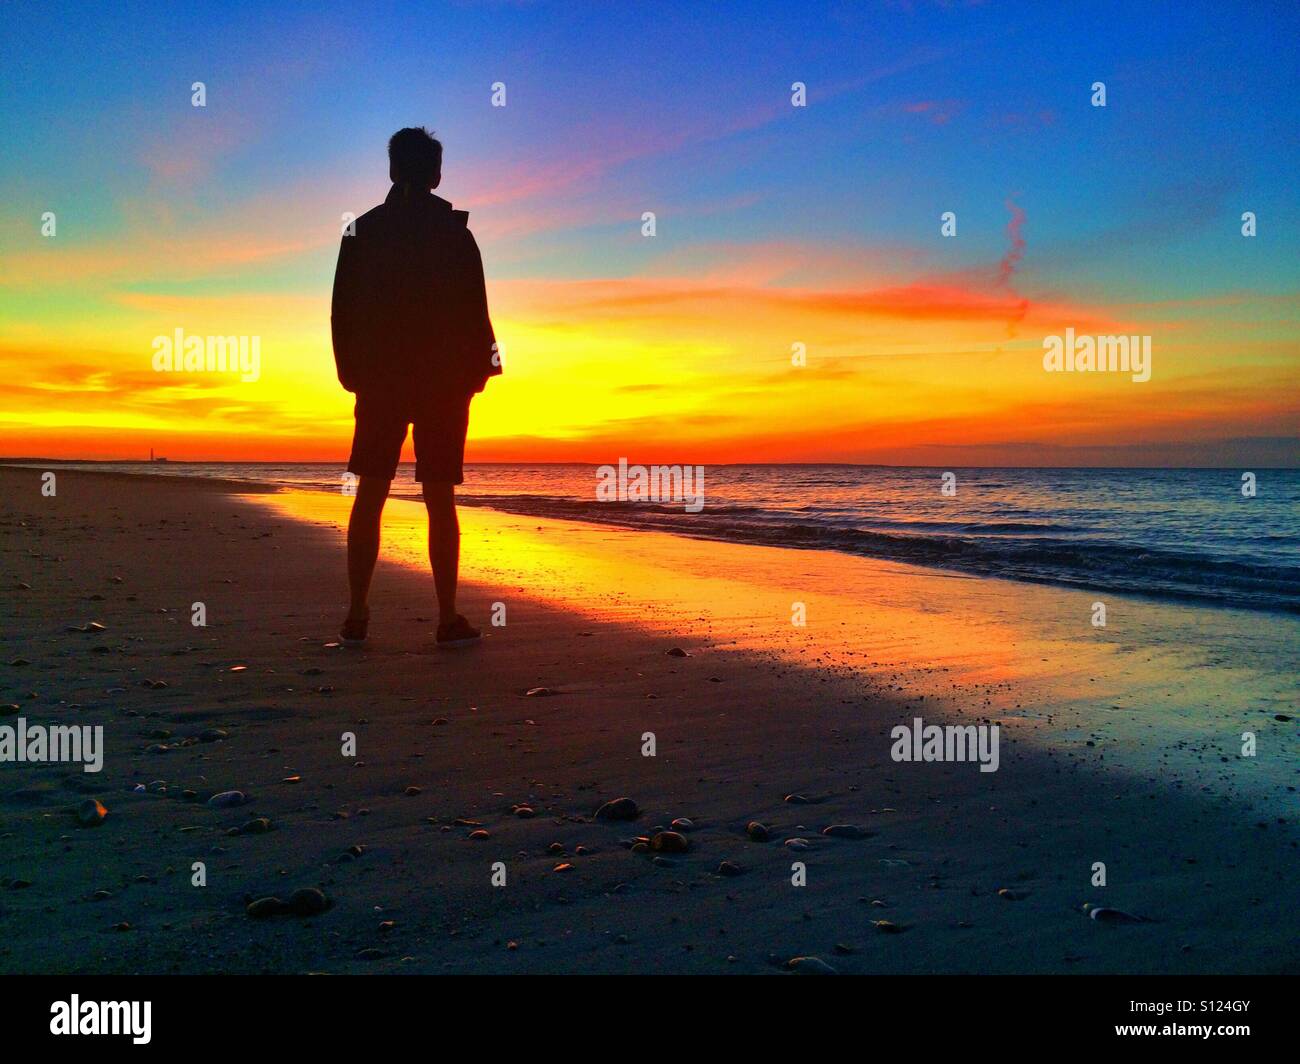 On the beach at sunset, Cape Cod,USA Stock Photo